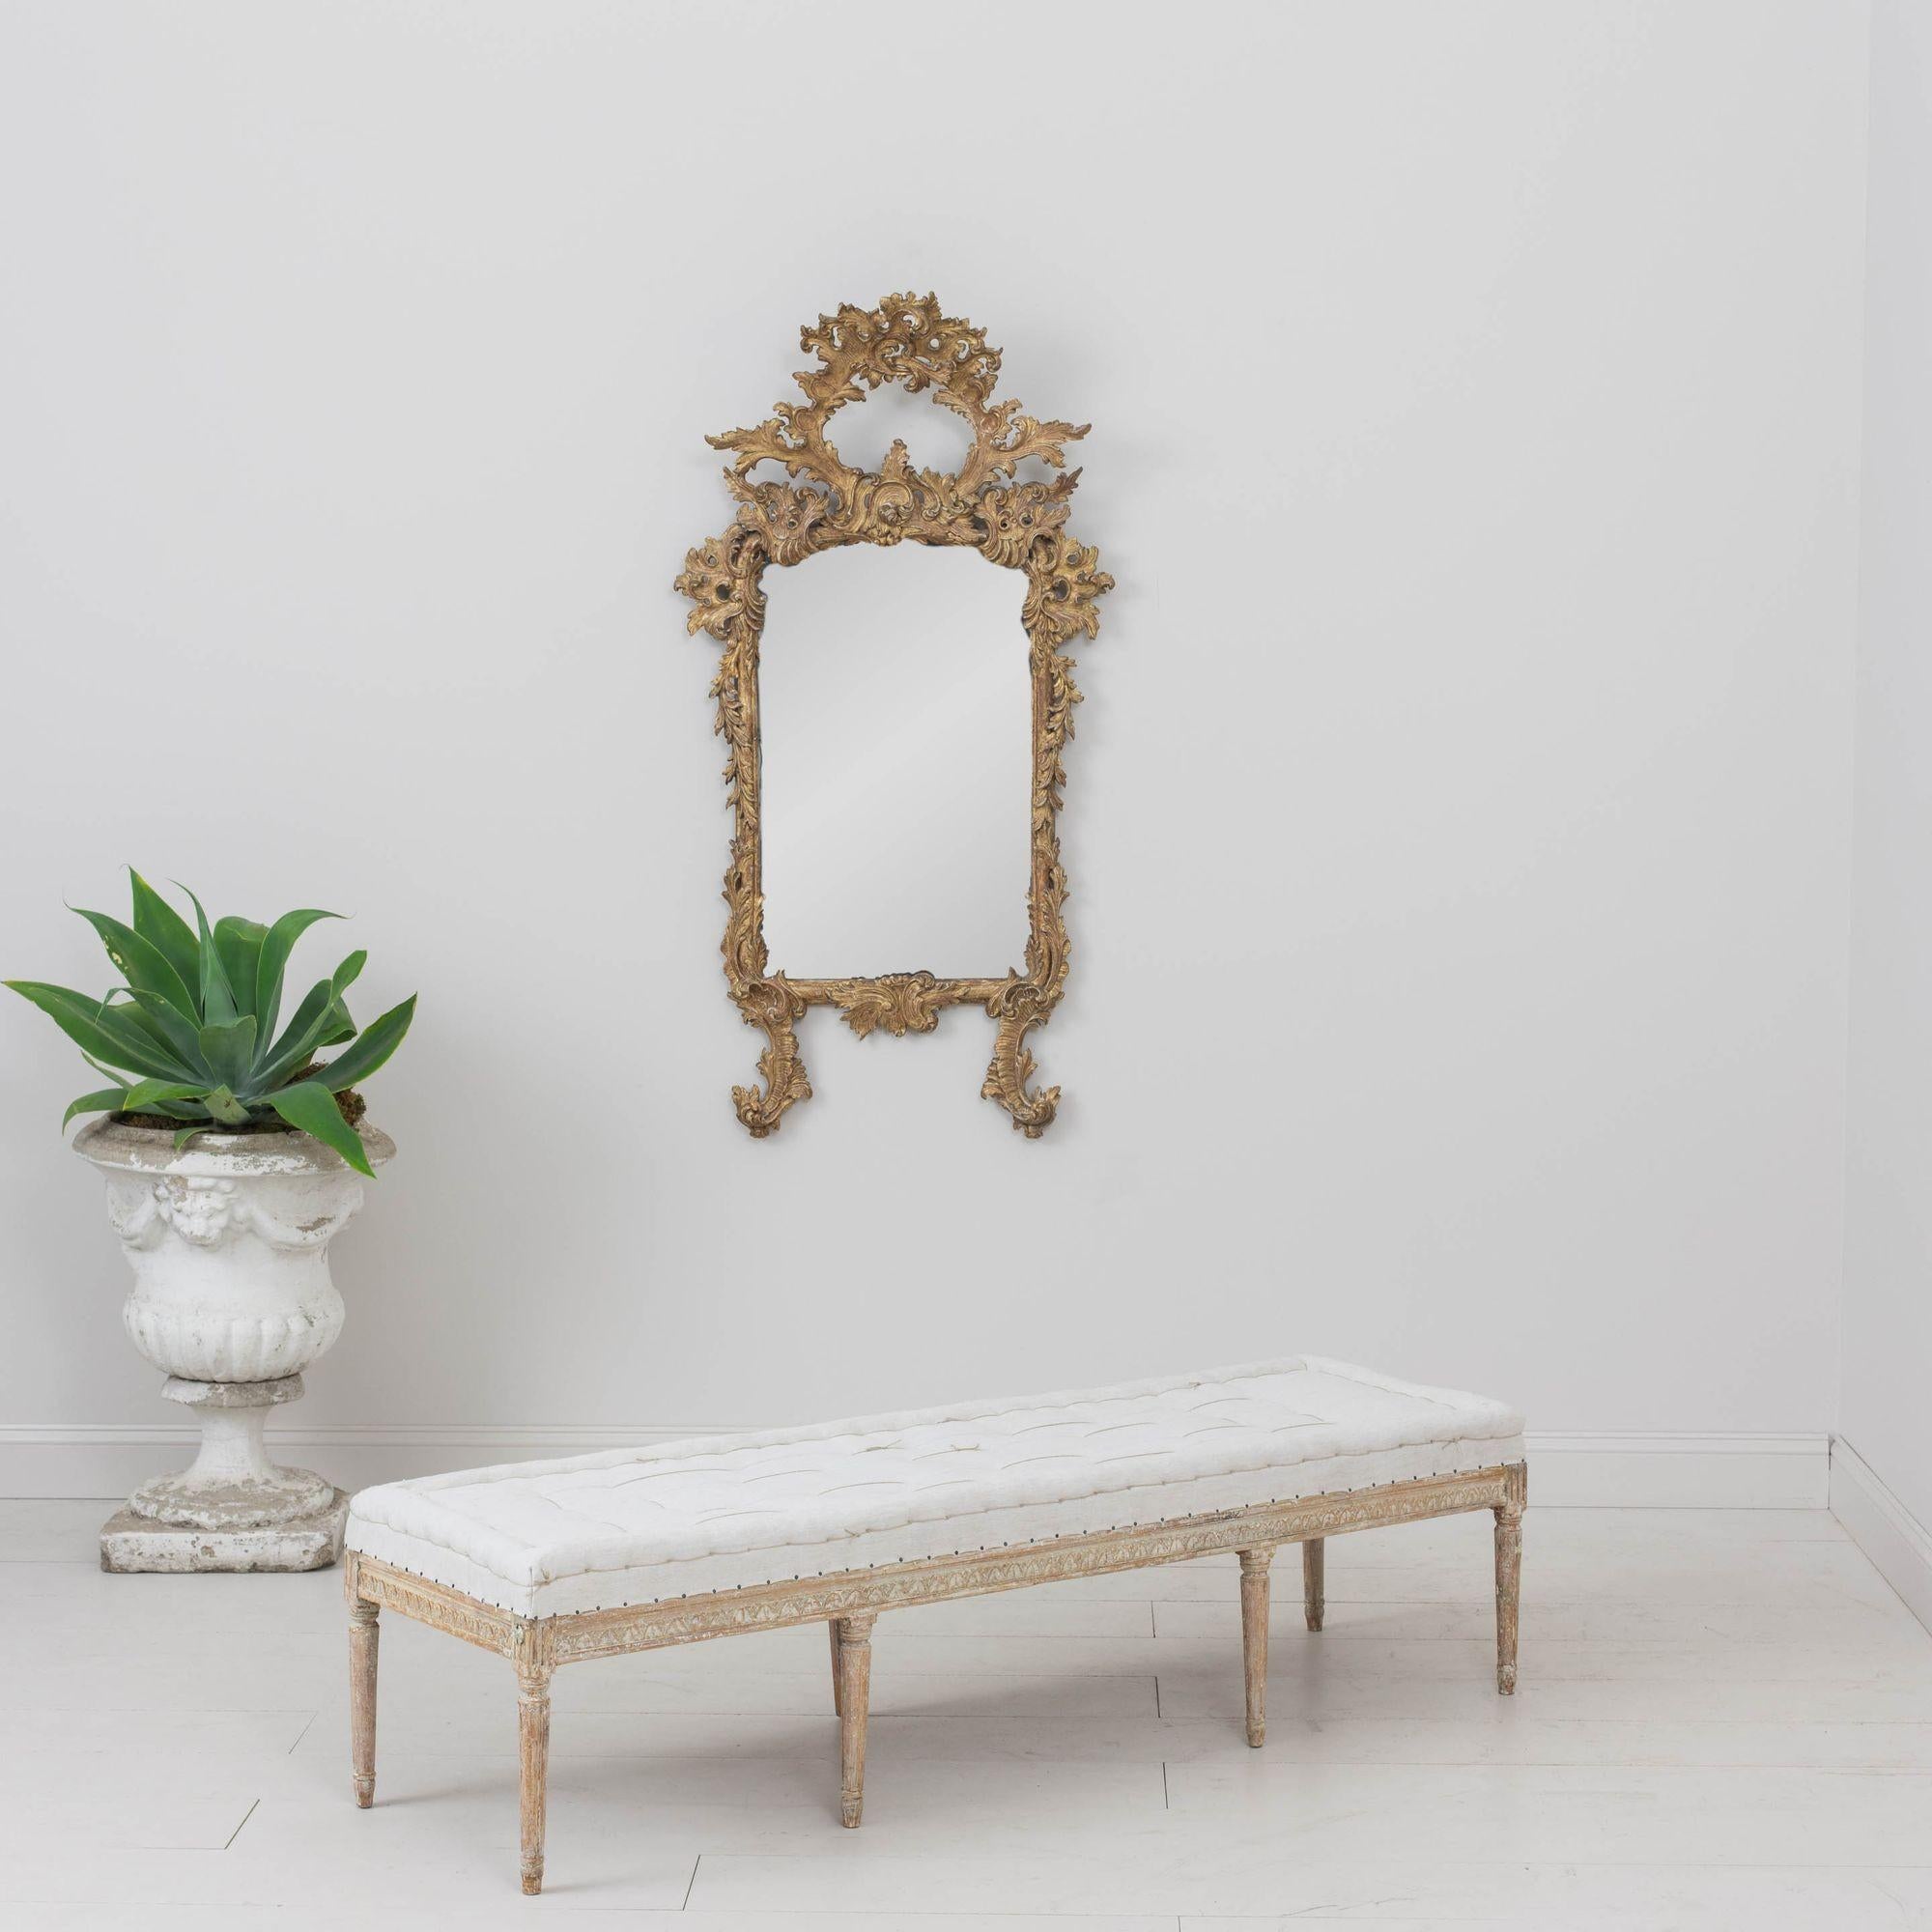 This is a richly carved 19th century Swedish Gustavian period bench, newly upholstered with a hand-stitched, tufted linen seat with nail head trim. The paint has been hand-scraped to reveal the original chalky white paint surface with areas were the